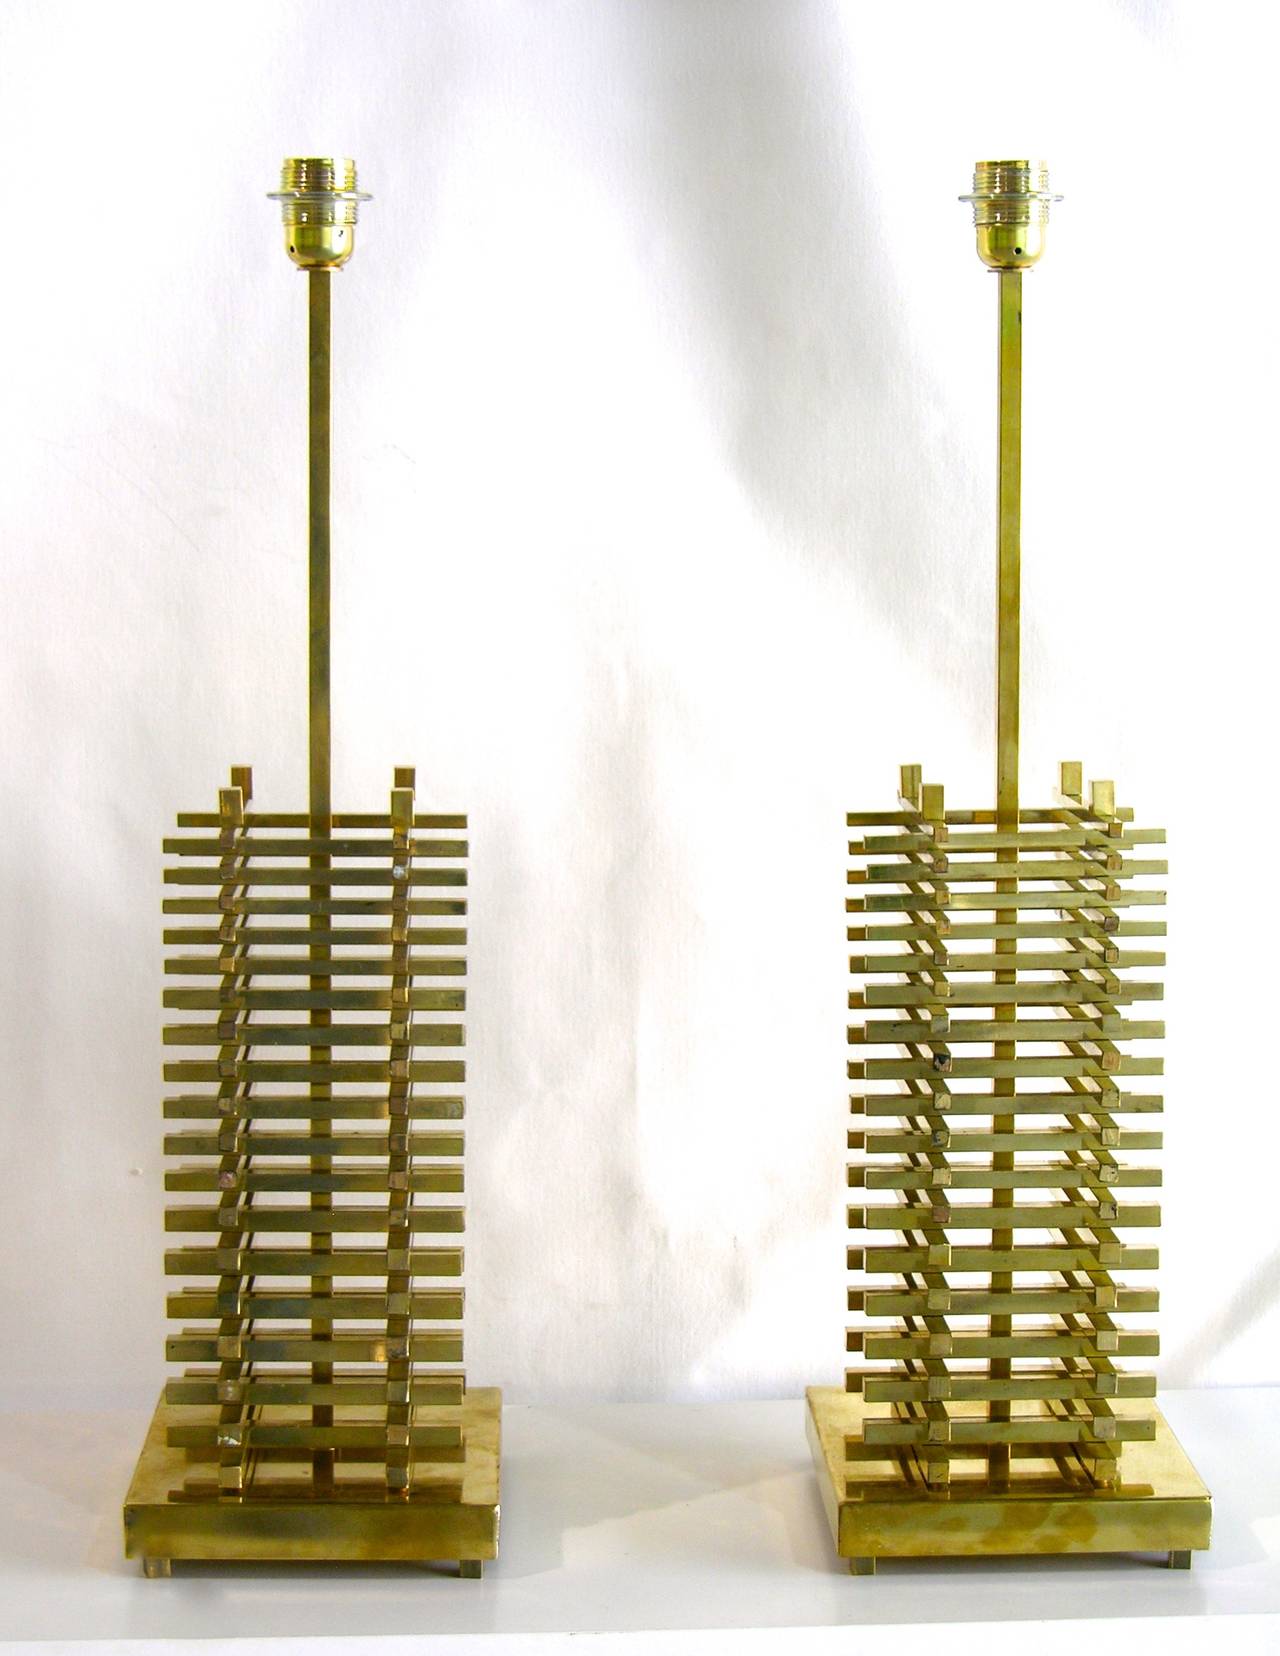 These grand size vintage Italian lamps in brass are entirely handcrafted and make a true statement, not only for the architectural design that recalls Romeo Rega's creations but also for the execution with the brass minimalist bars that are each of